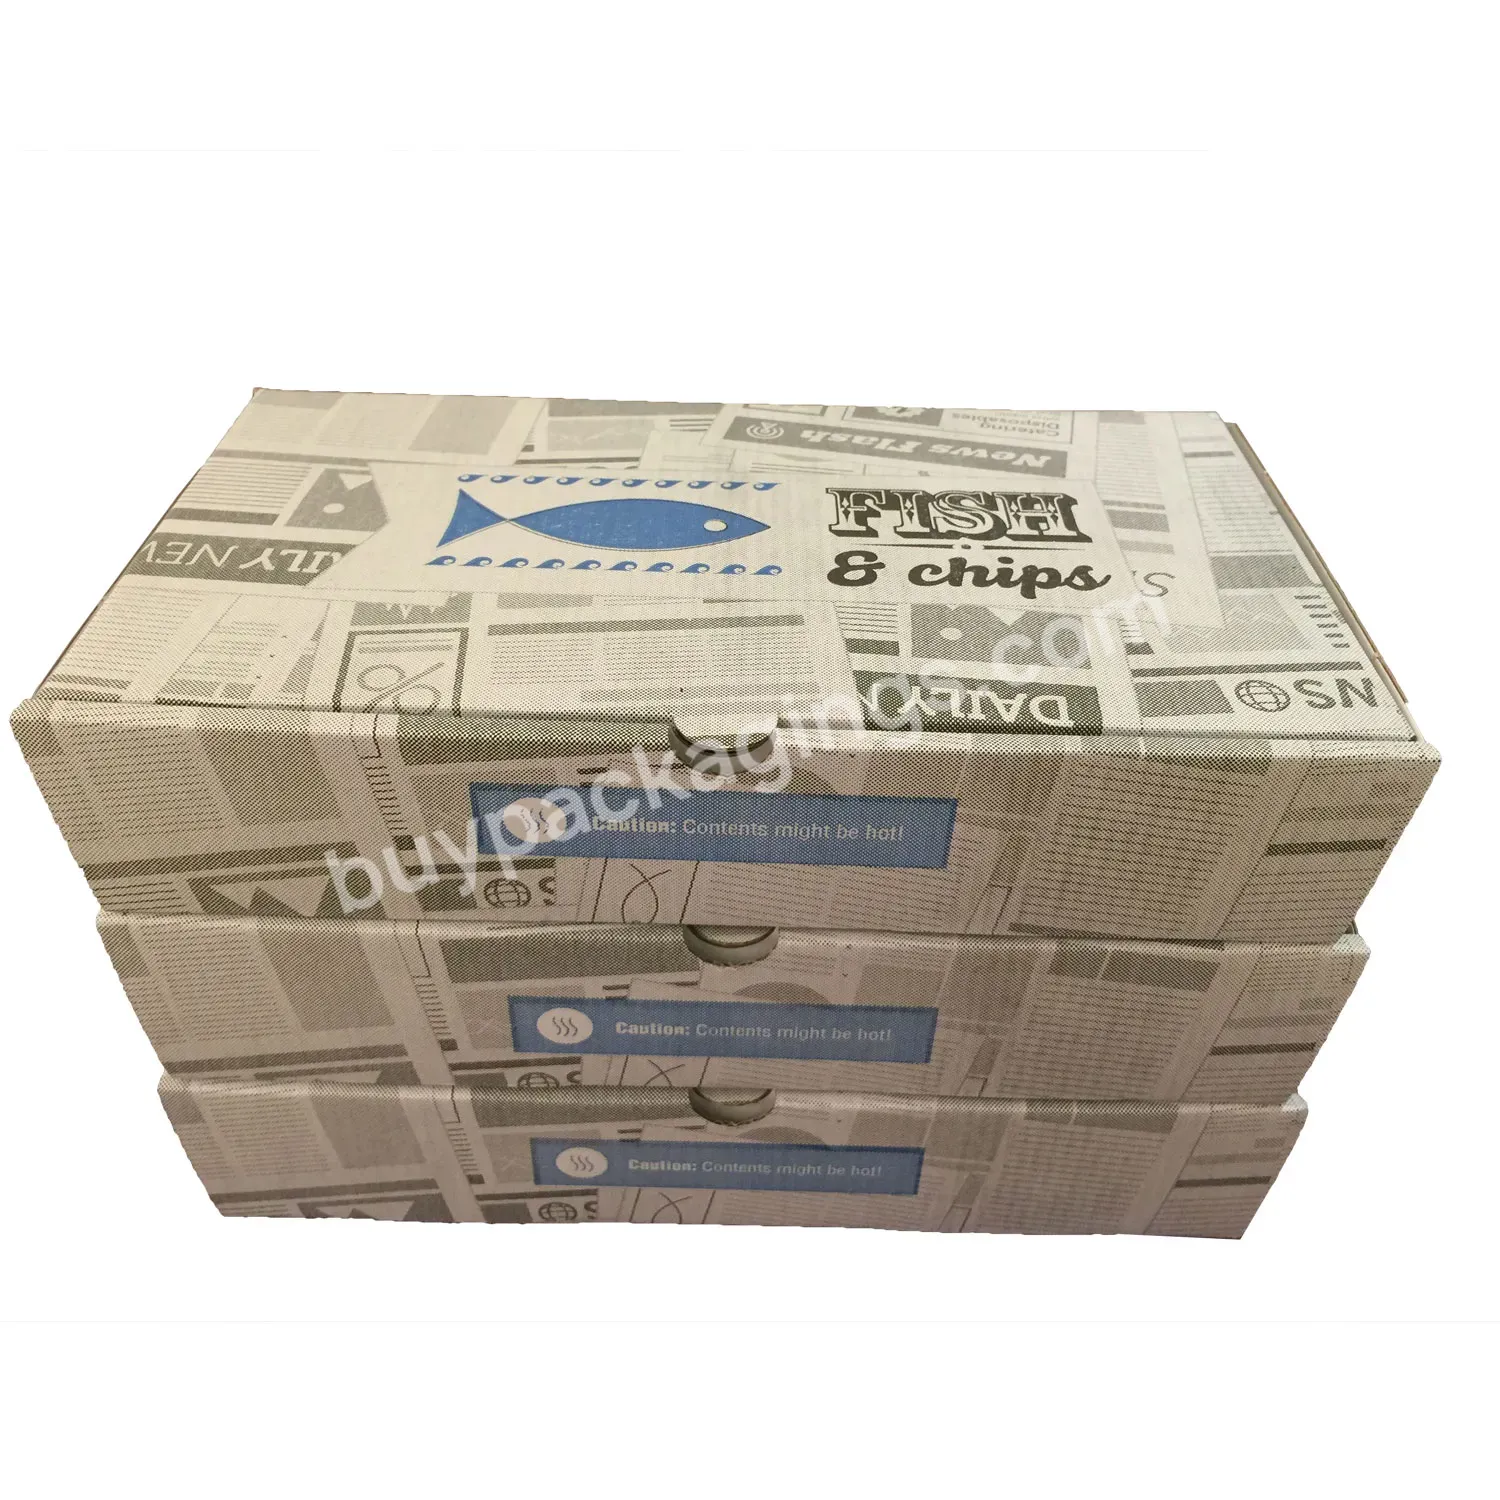 View Larger Image Add To Compare Share Biodegradable Fish And Chips Packaging Boxes Corrugated Paper Boxes Custom Fast Food Pa - Buy Fashion Carton Pantyhose Pics,Fashion Carton Pantyhose Pics,High Quality Takeaway Pizza Box.